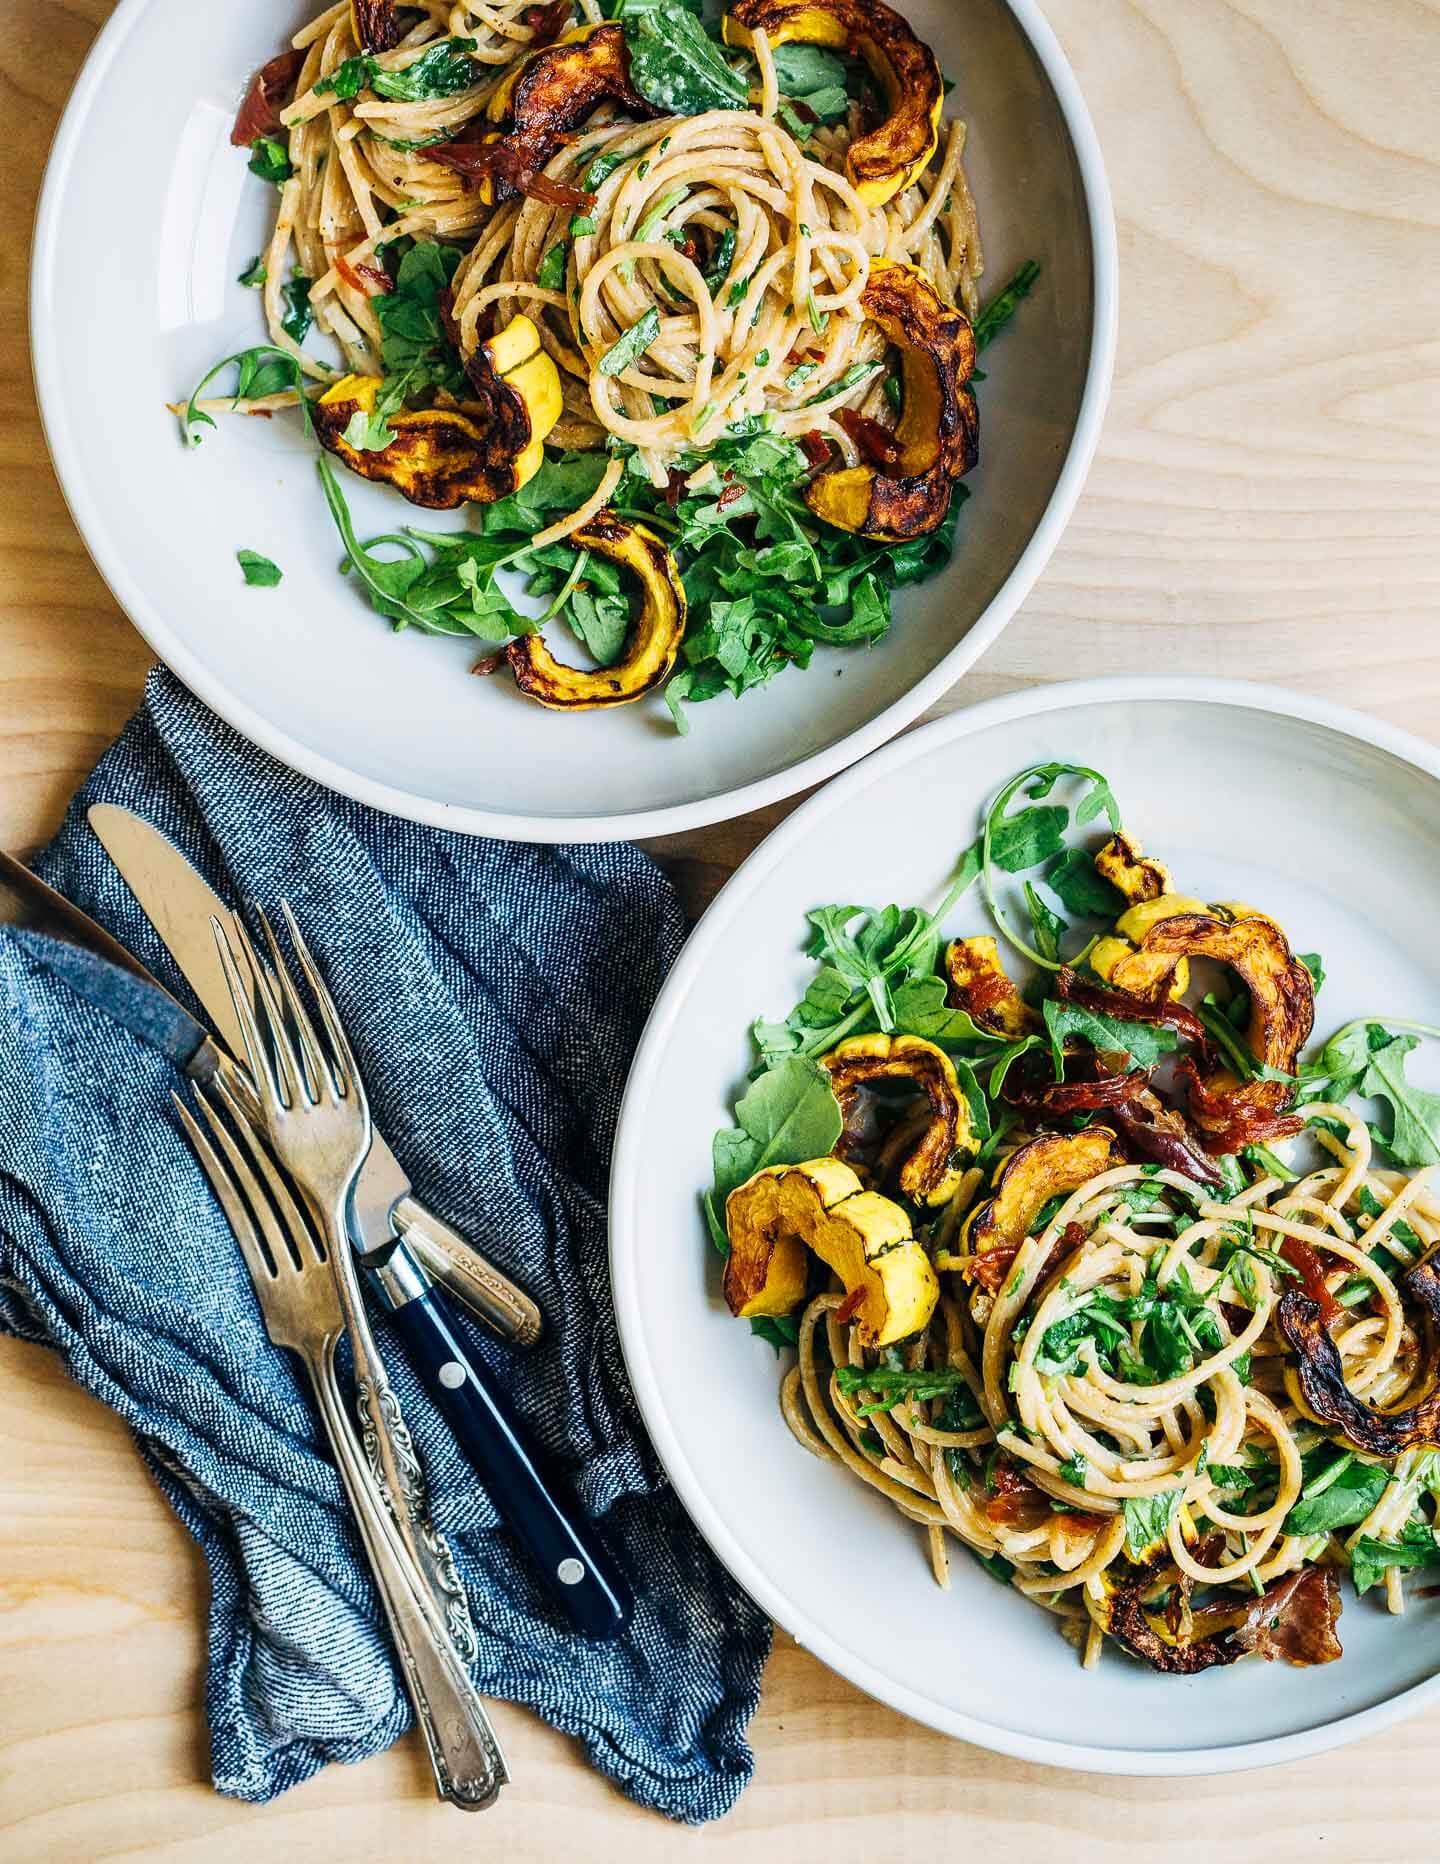 Up your pasta night game with this recipe for al dente whole wheat spaghetti tossed with creamy Parmesan sauce, roasted delicata squash, crispy speck, and handfuls of arugula and fresh herbs. Copious amounts of fresh ground black pepper are optional.